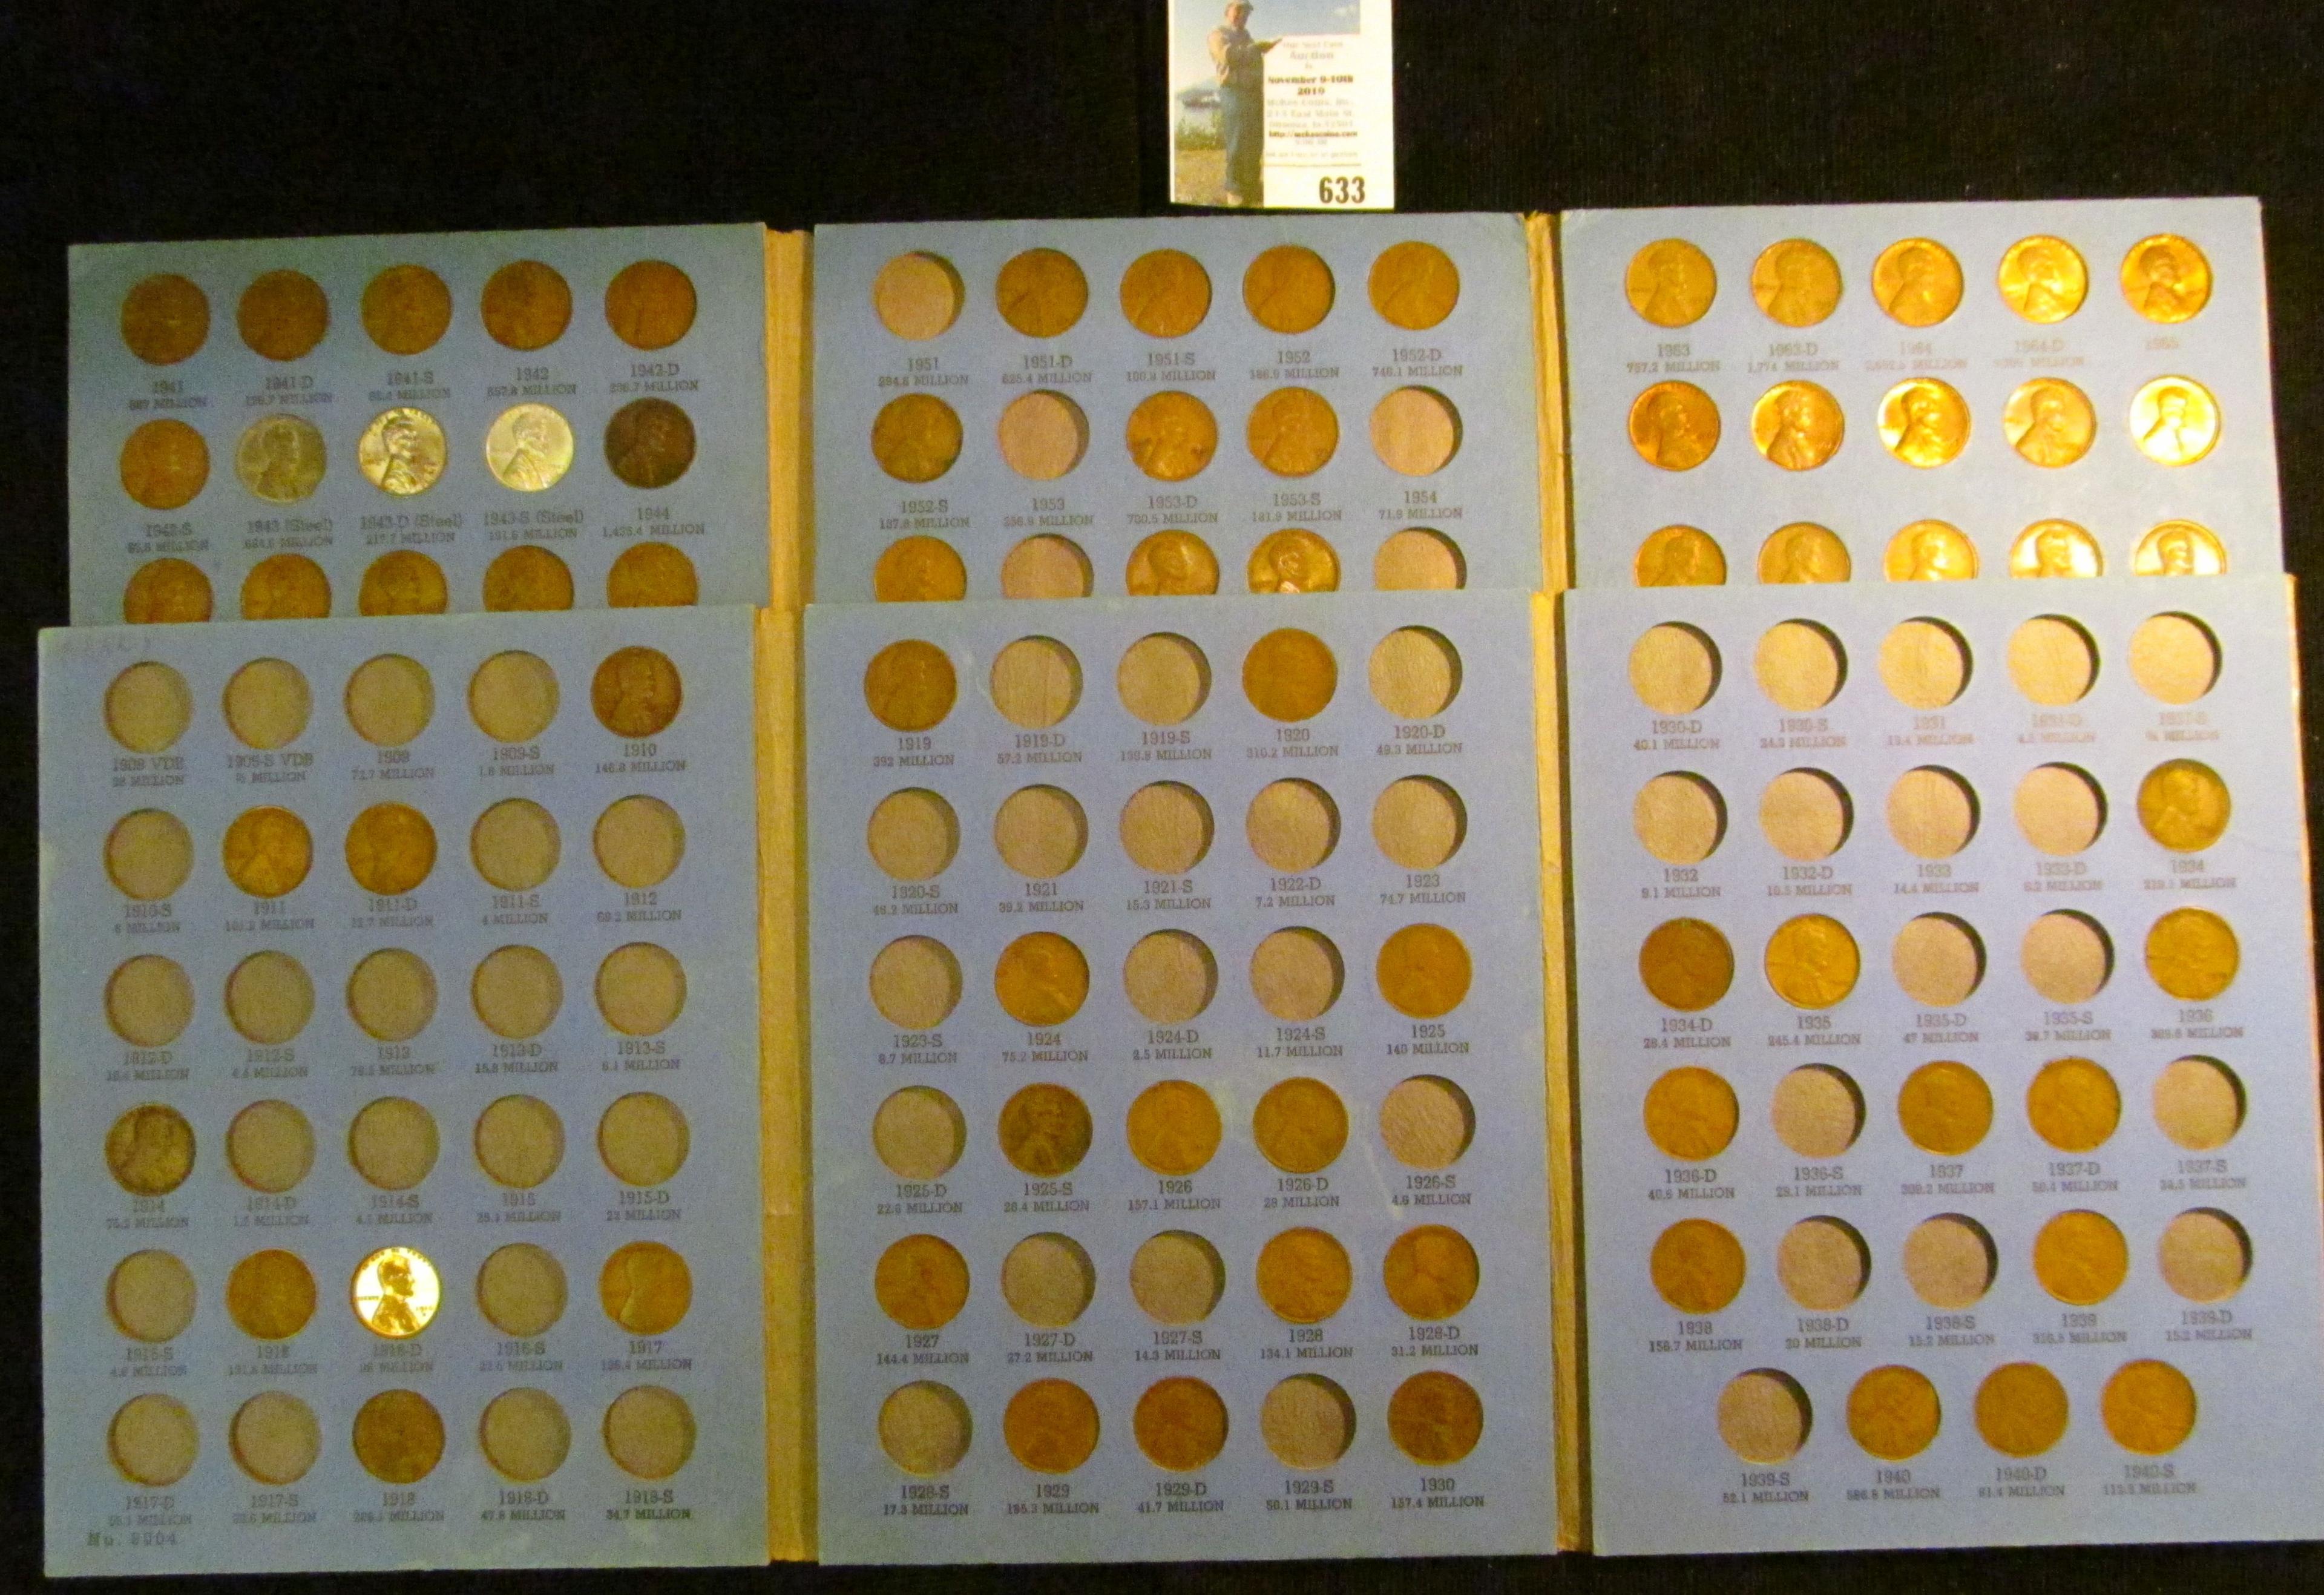 Pair of Blue Whitman Lincoln Cent Folders with coins dating back to 1910.